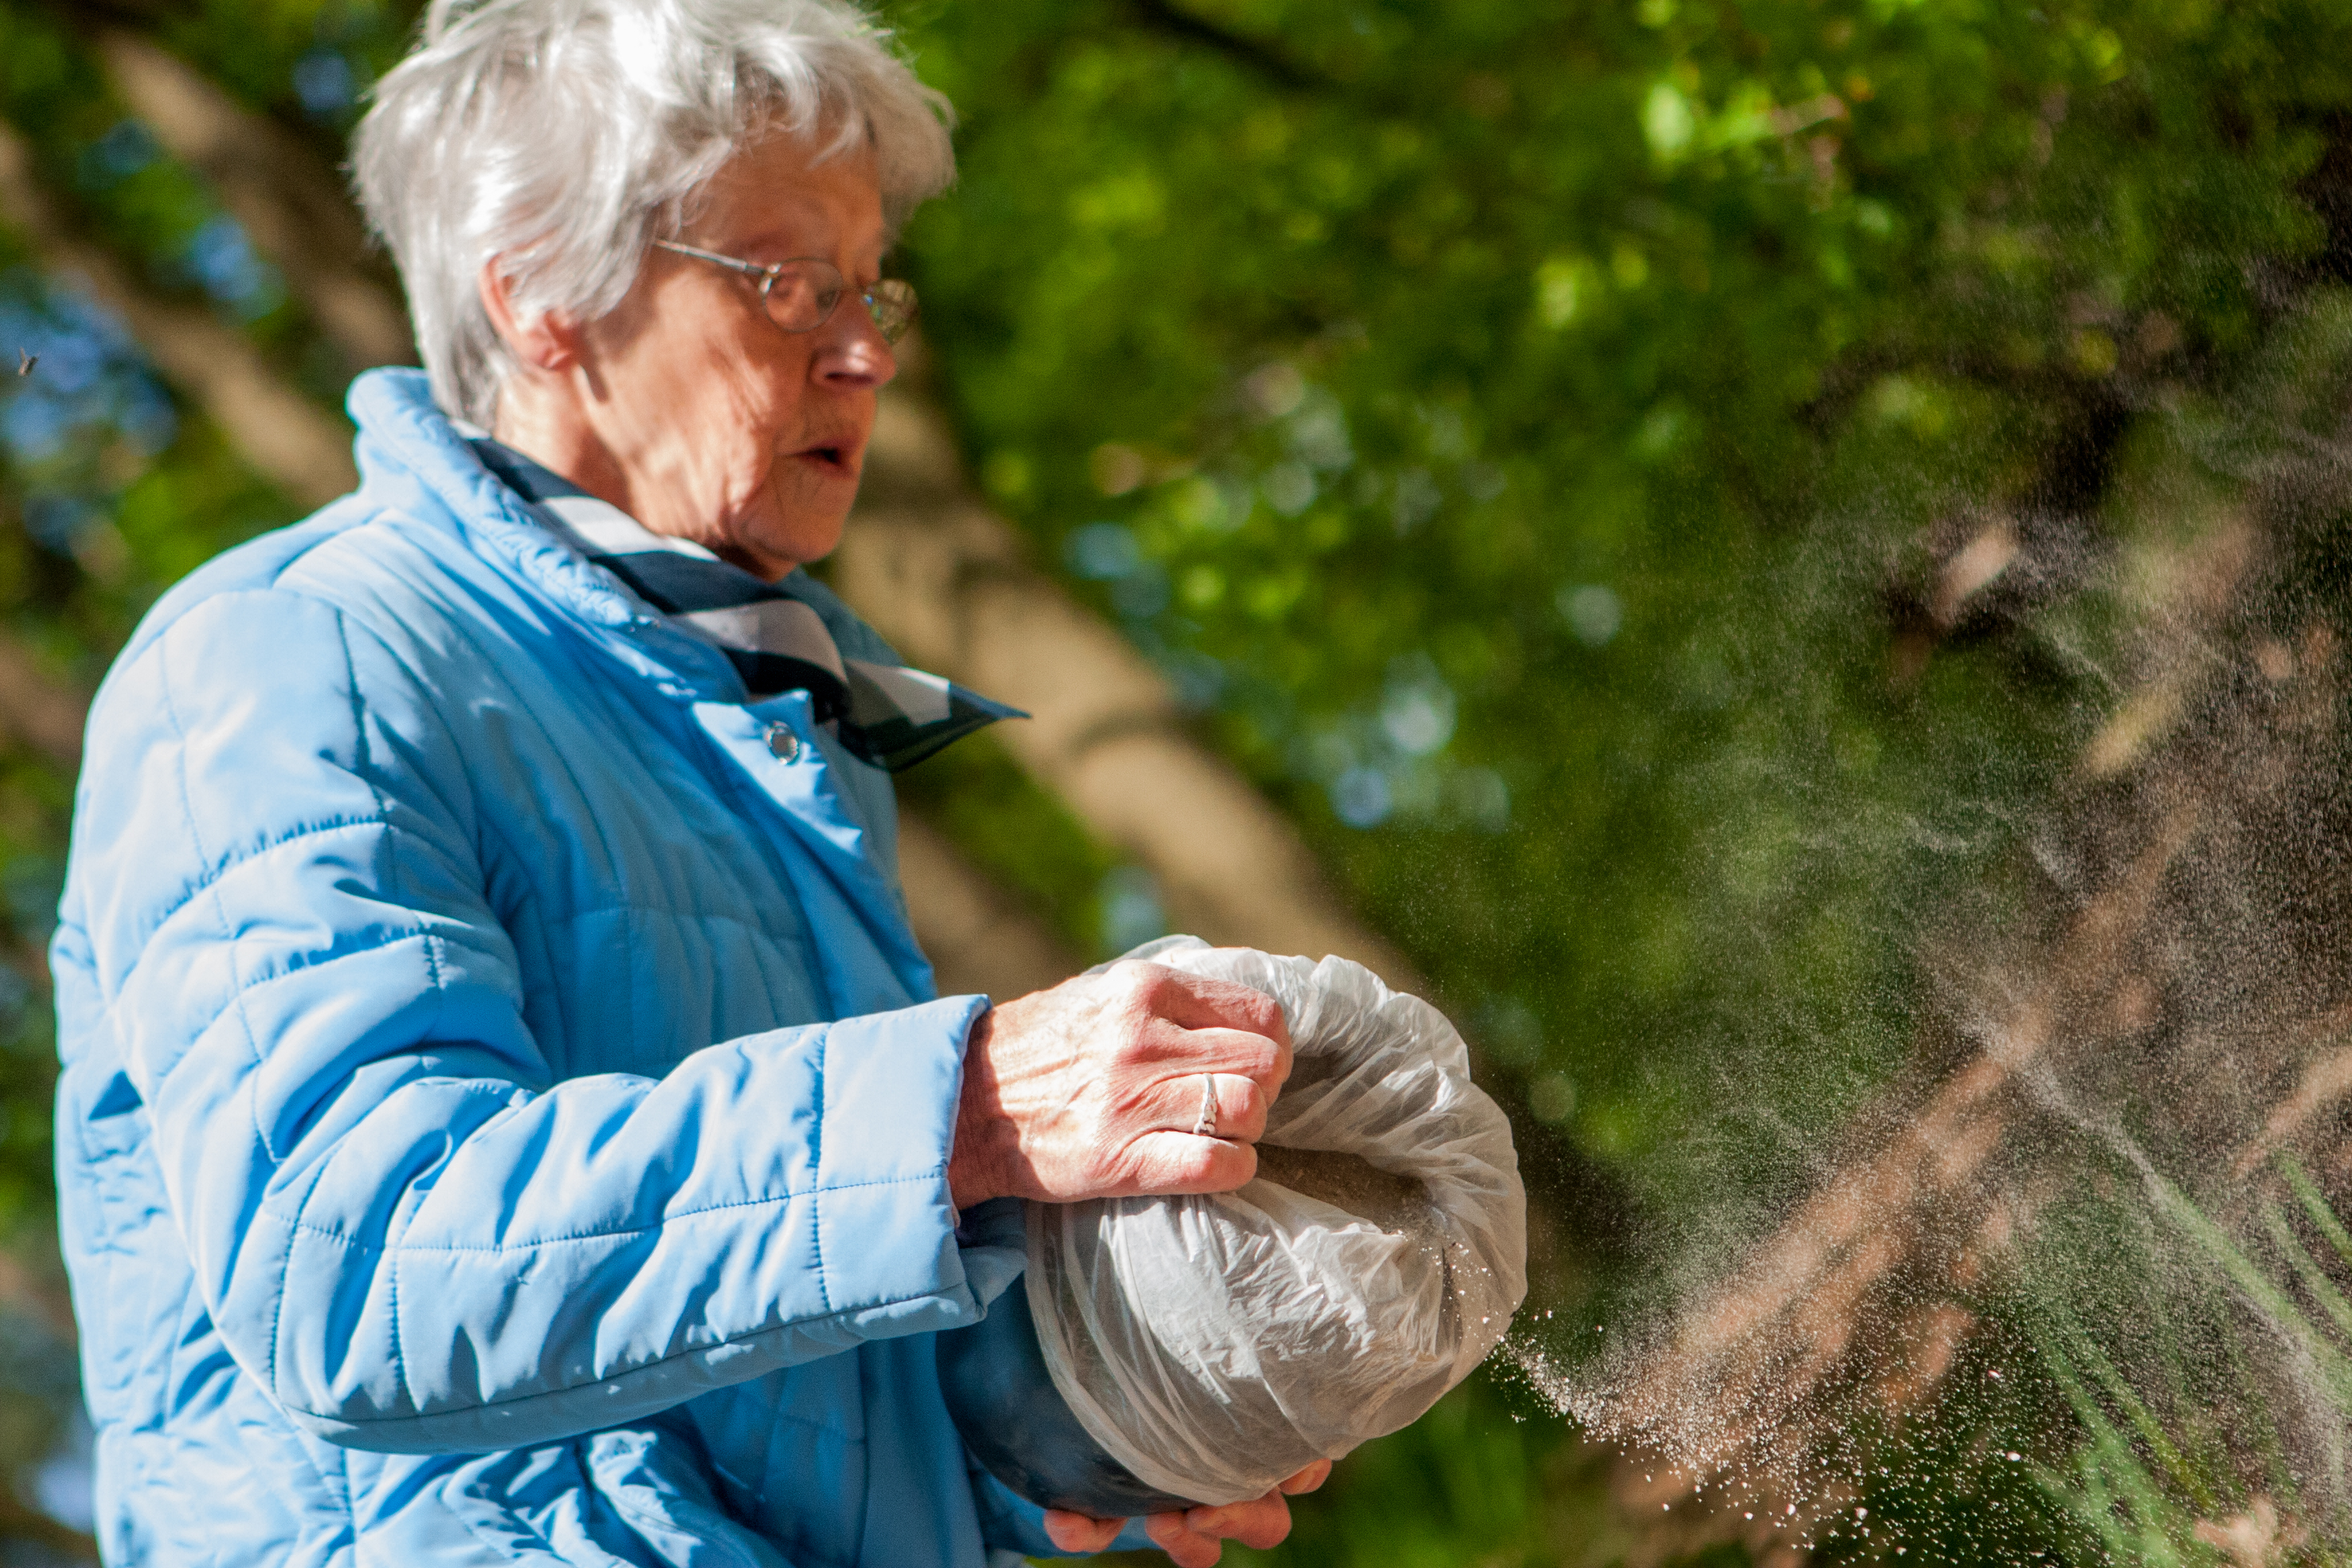 An older lady spreads ashes of a loved one in a forest | Source: Shutterstock